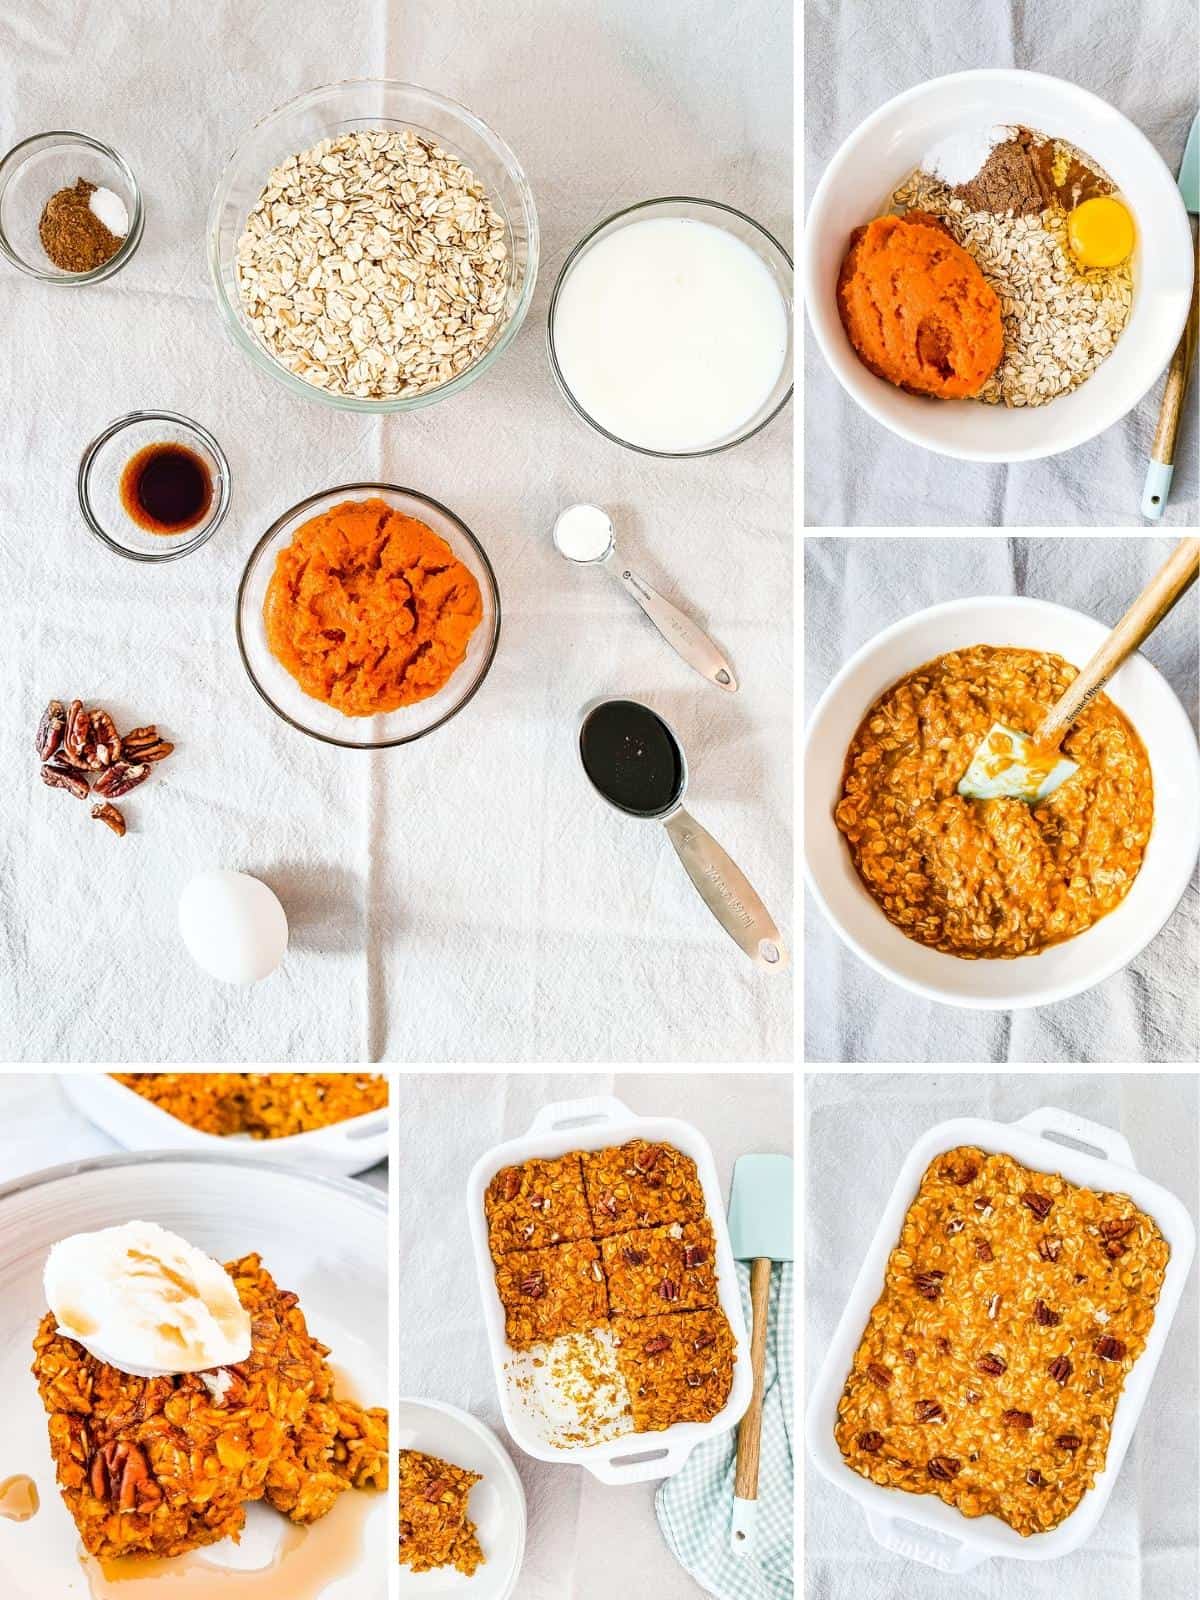 A series of 6 photos showing the process of making WW pumpkin baked oatmeal.